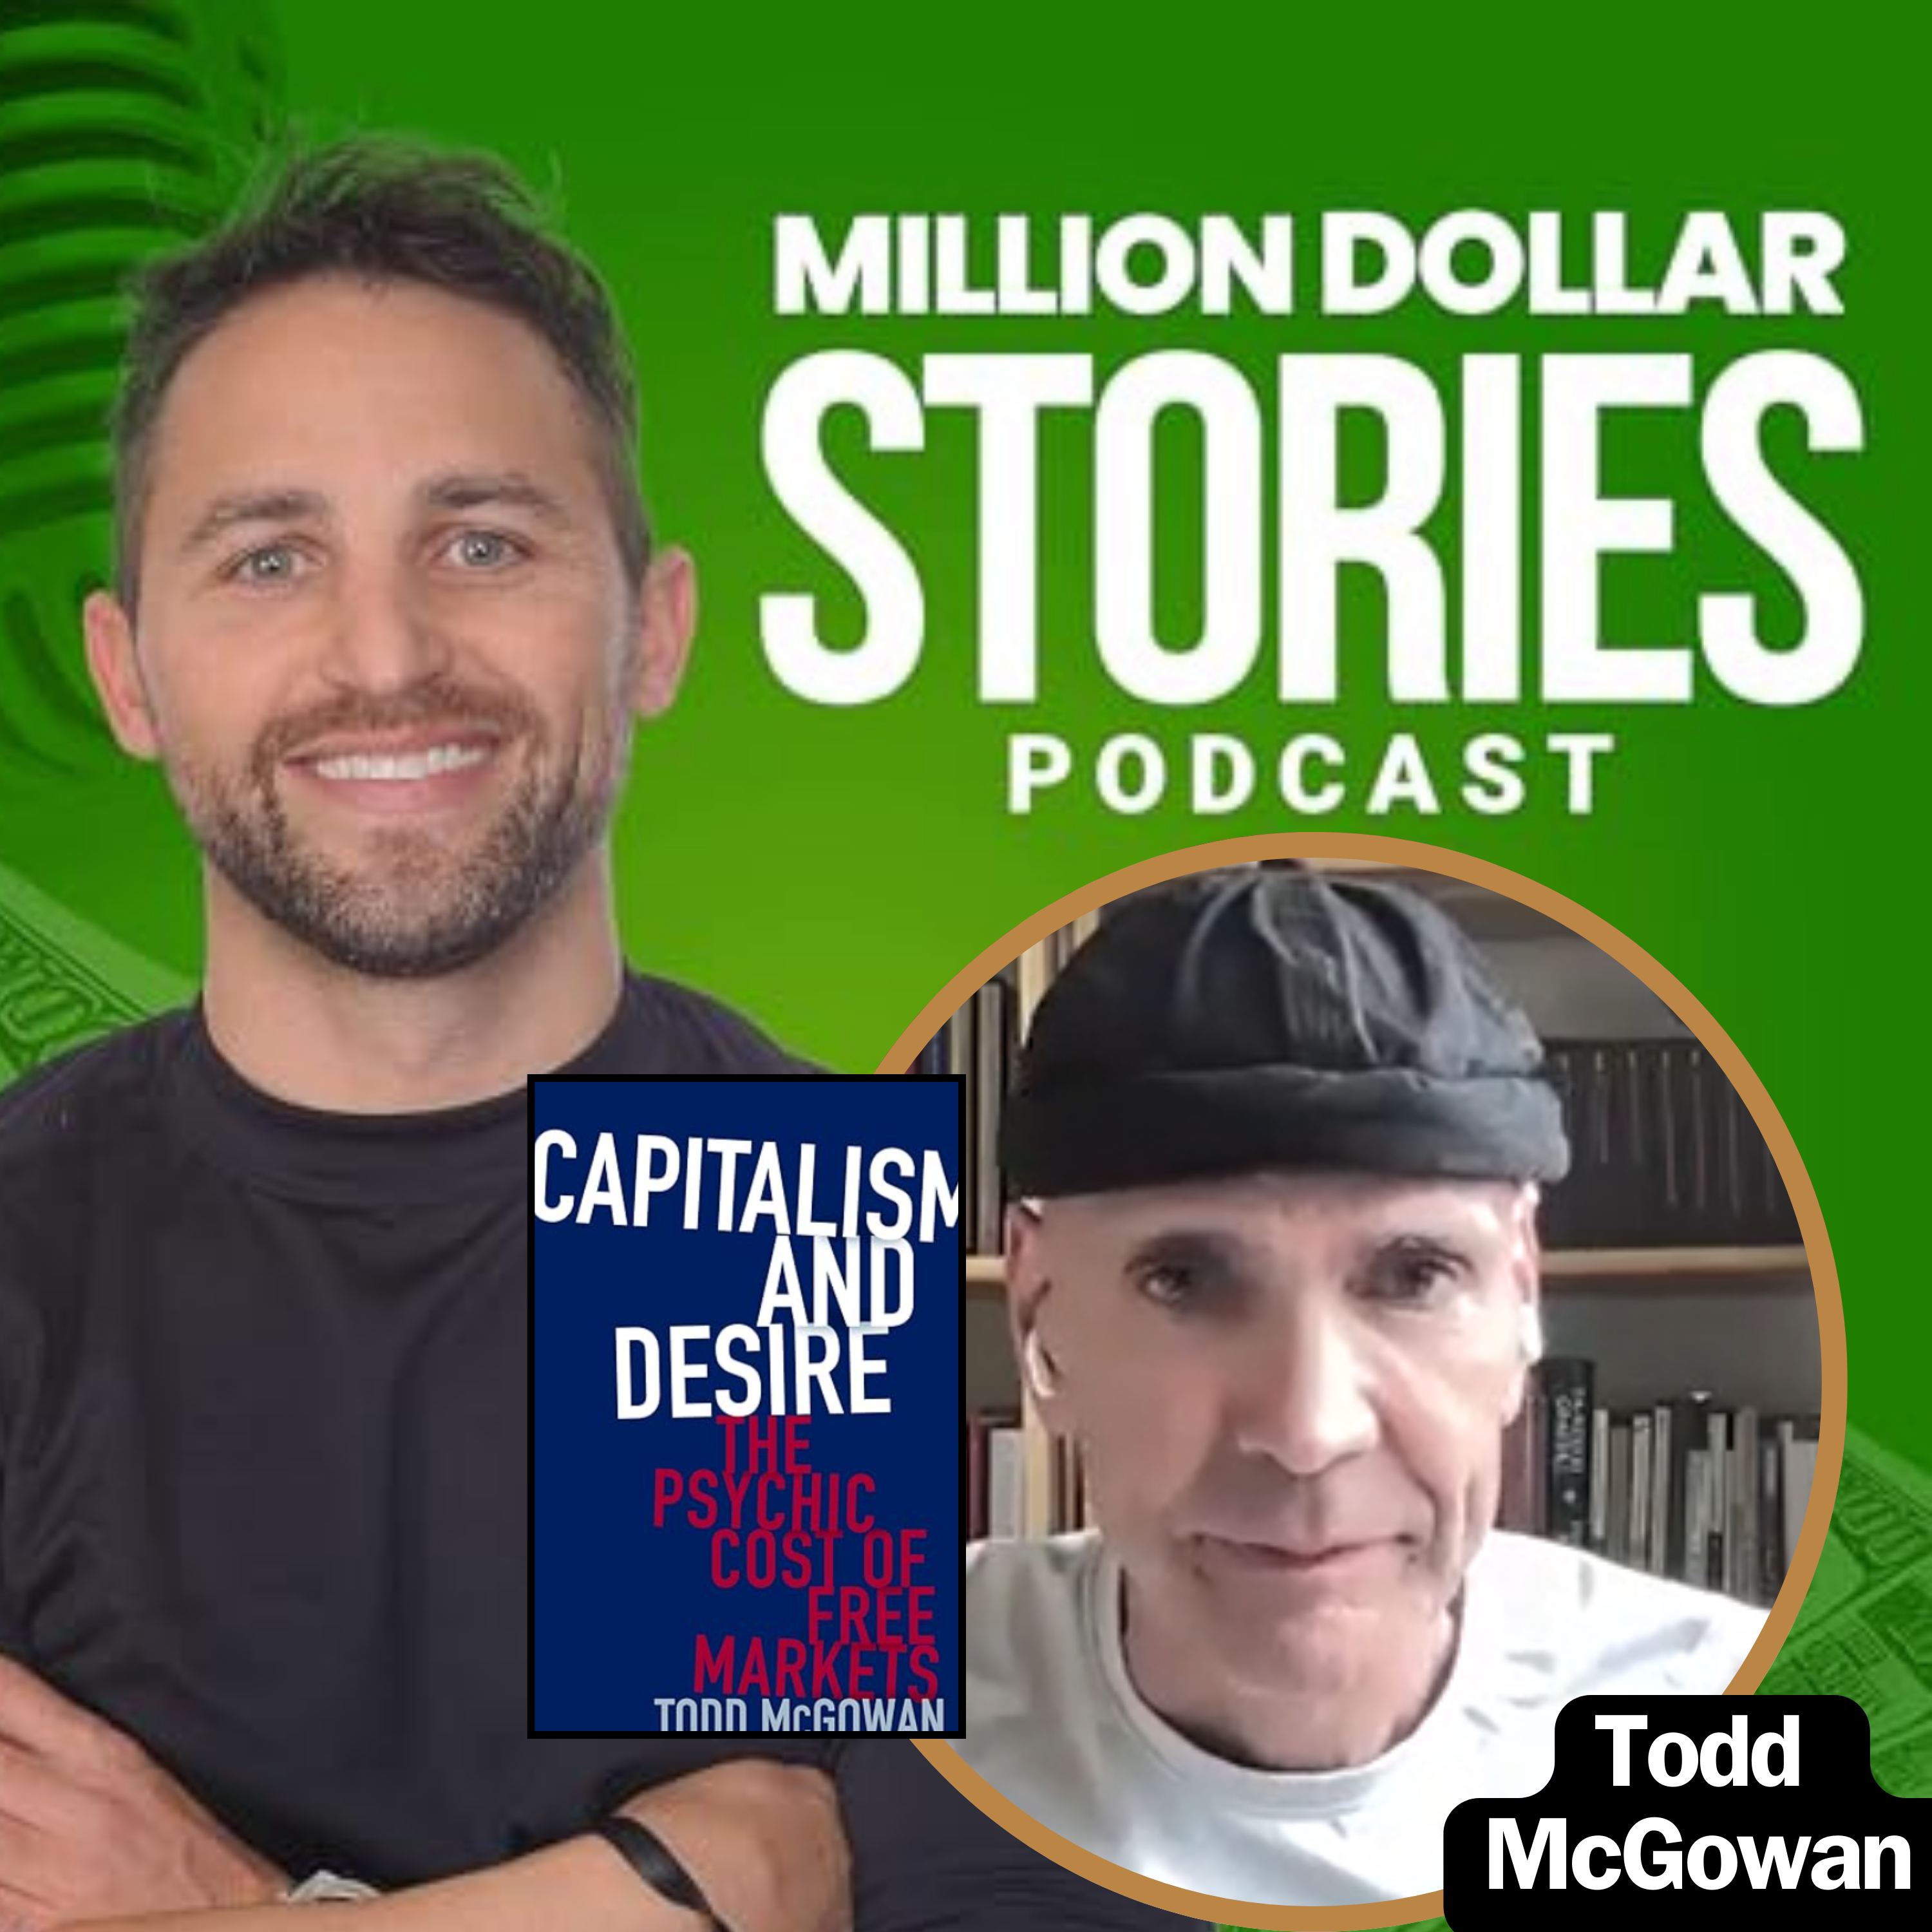 Todd McGowan – Author of “Capitalism and Desire: The Psychic Cost of Free Markets”